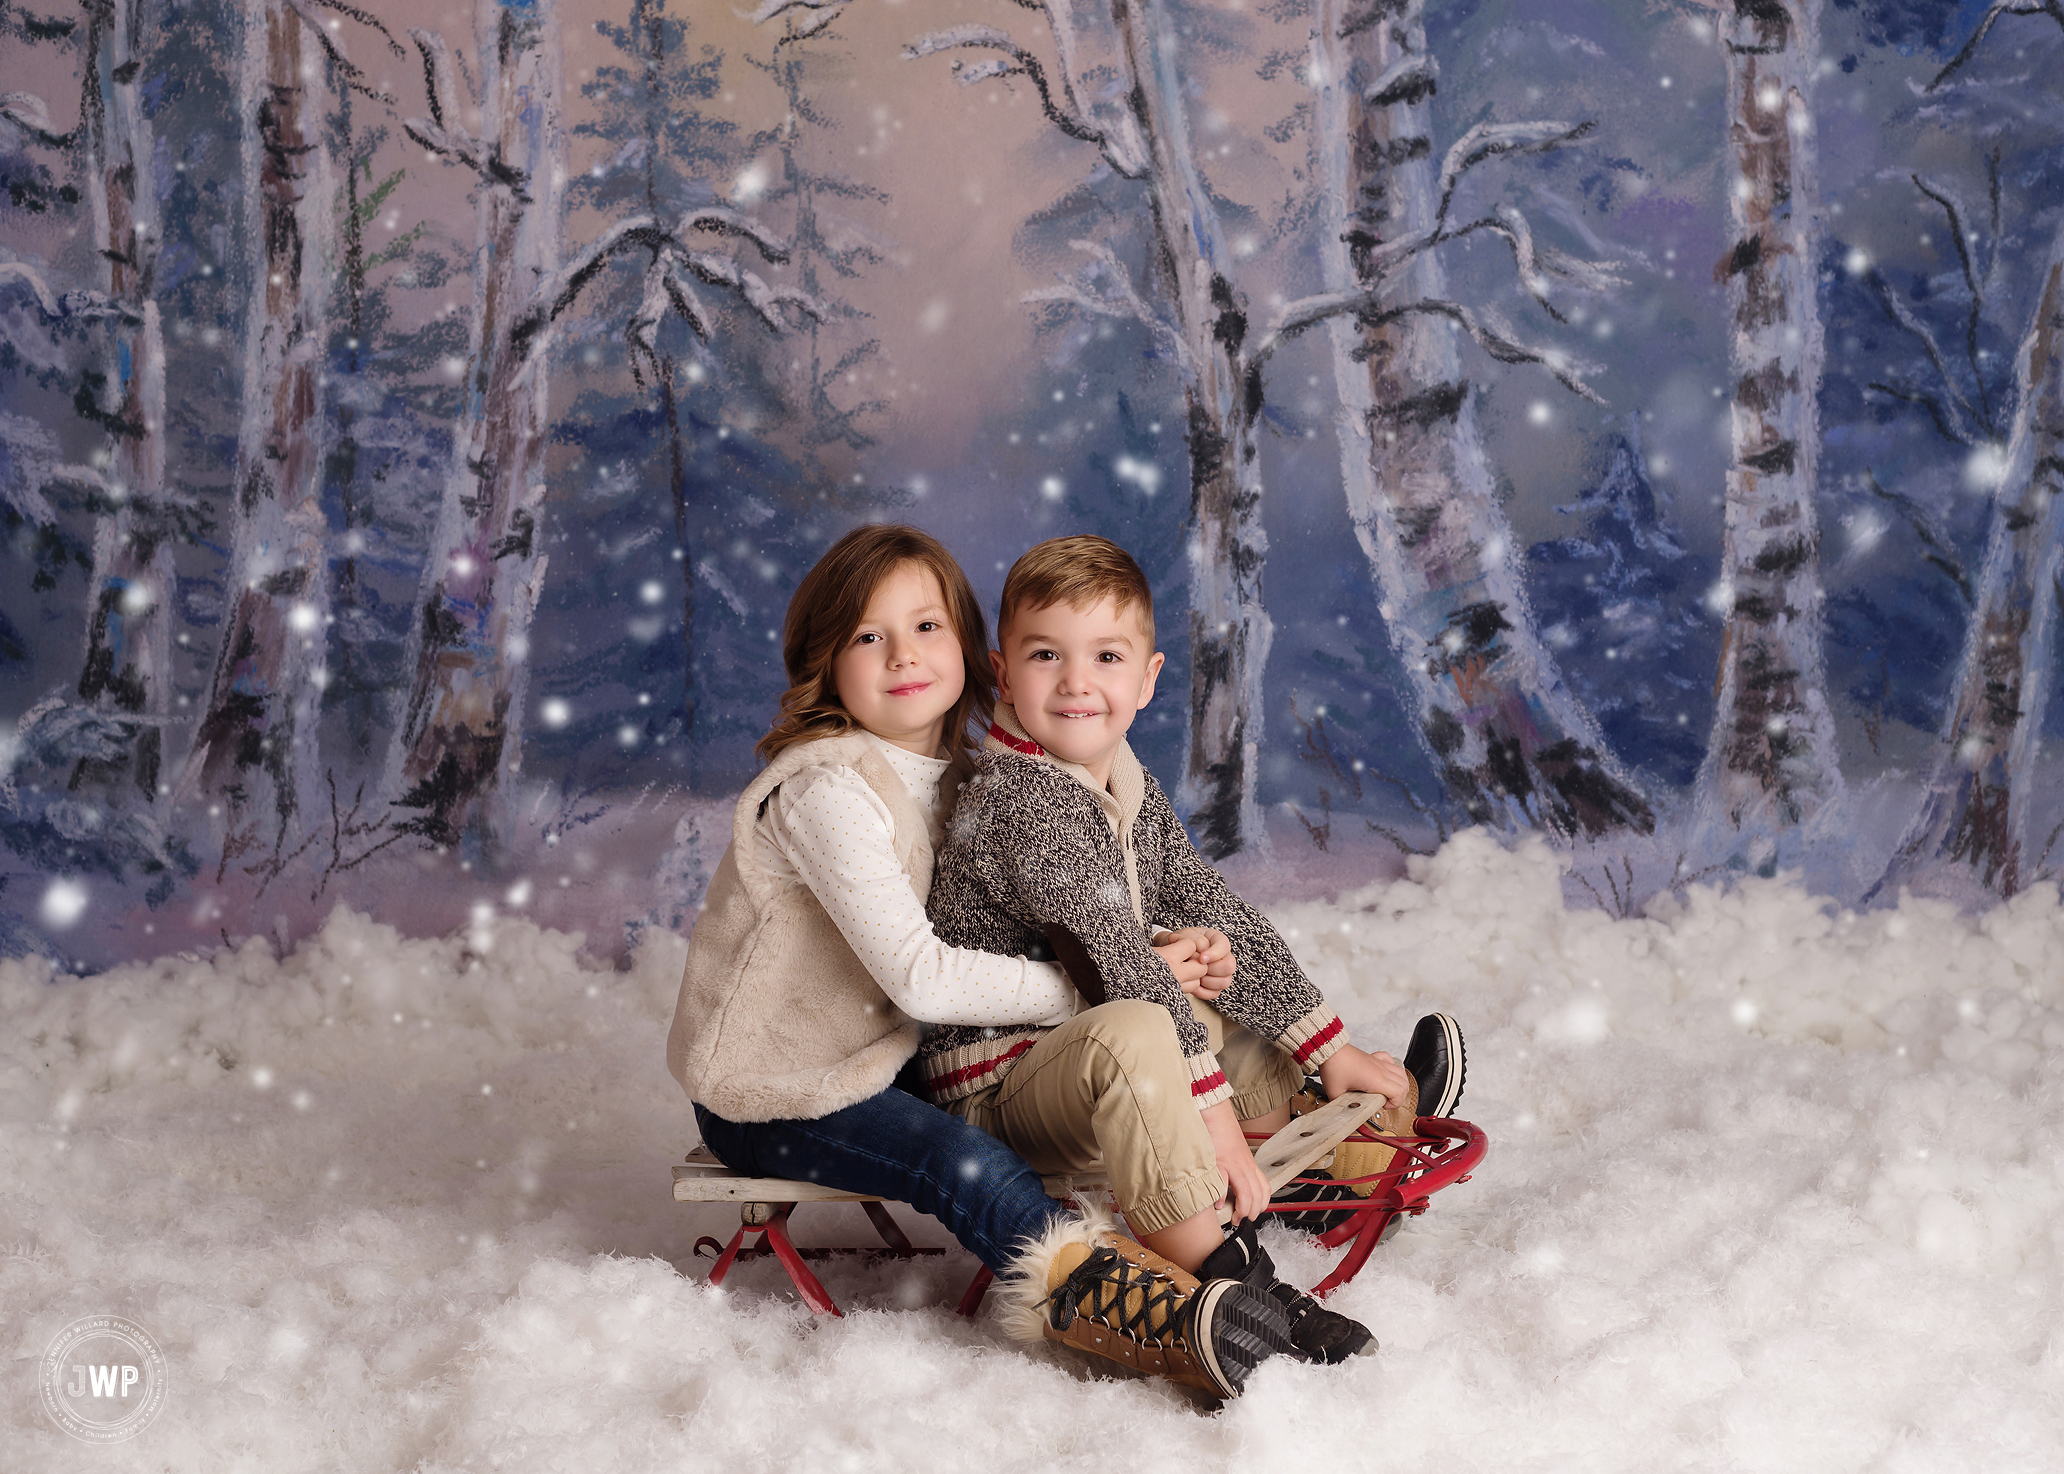 brother sister siblings snow sleigh Winter scene Kingston mini session photography